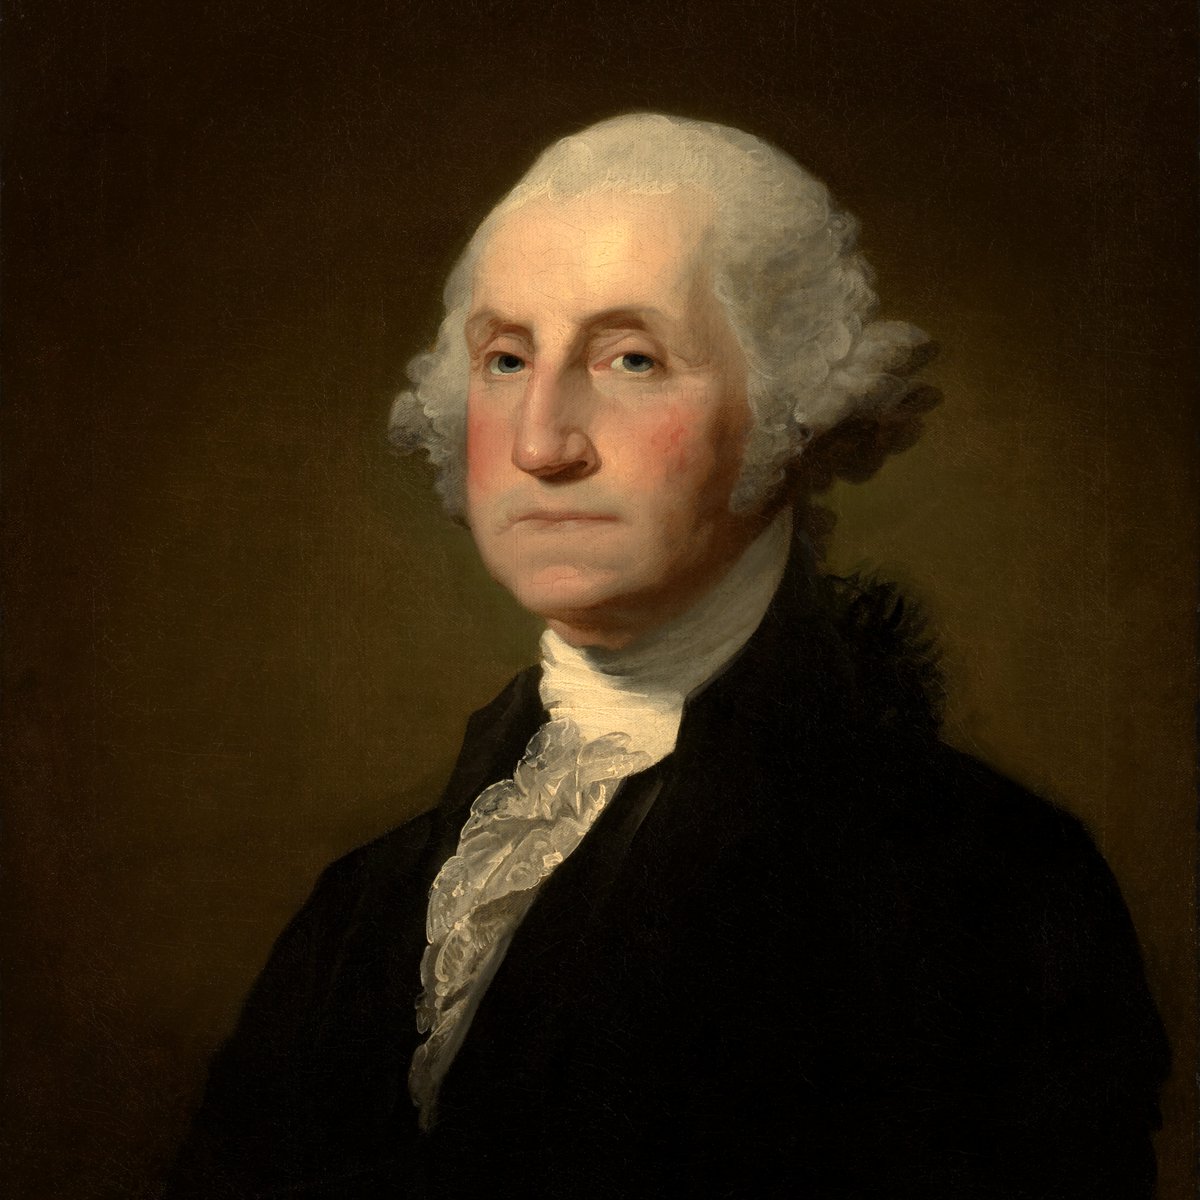 George Washington became the first President of the United States #OnThisDay in 1789 🇺🇸 During his time in office, he set the precedent of being known as 'Mr. President' - though the Senate had suggested more regal names such as 'His Excellency' & 'His Highness the President'!